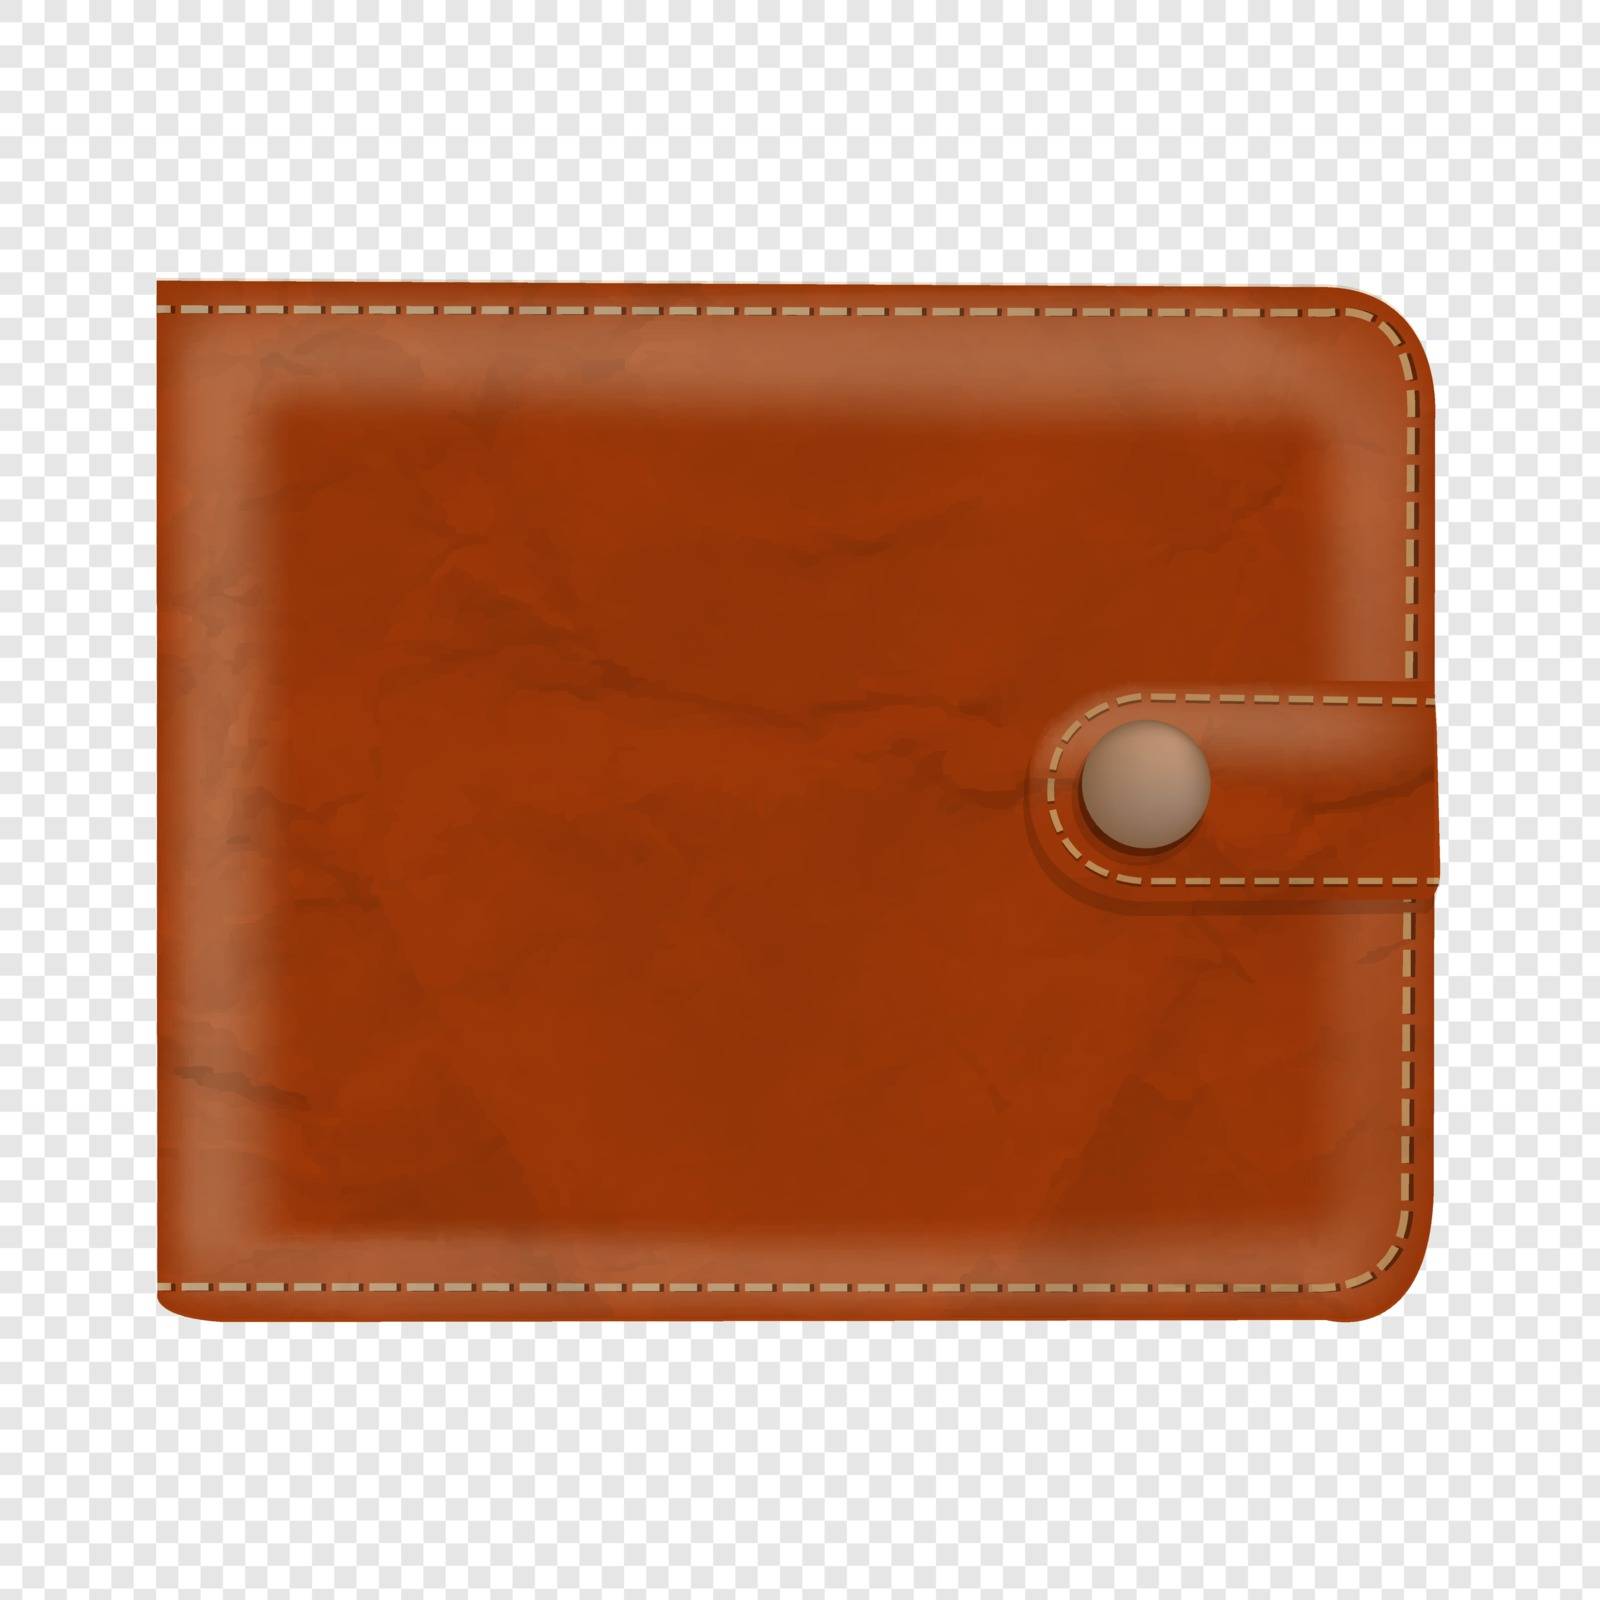 Wallet Isolated Transparent Background by barbaliss